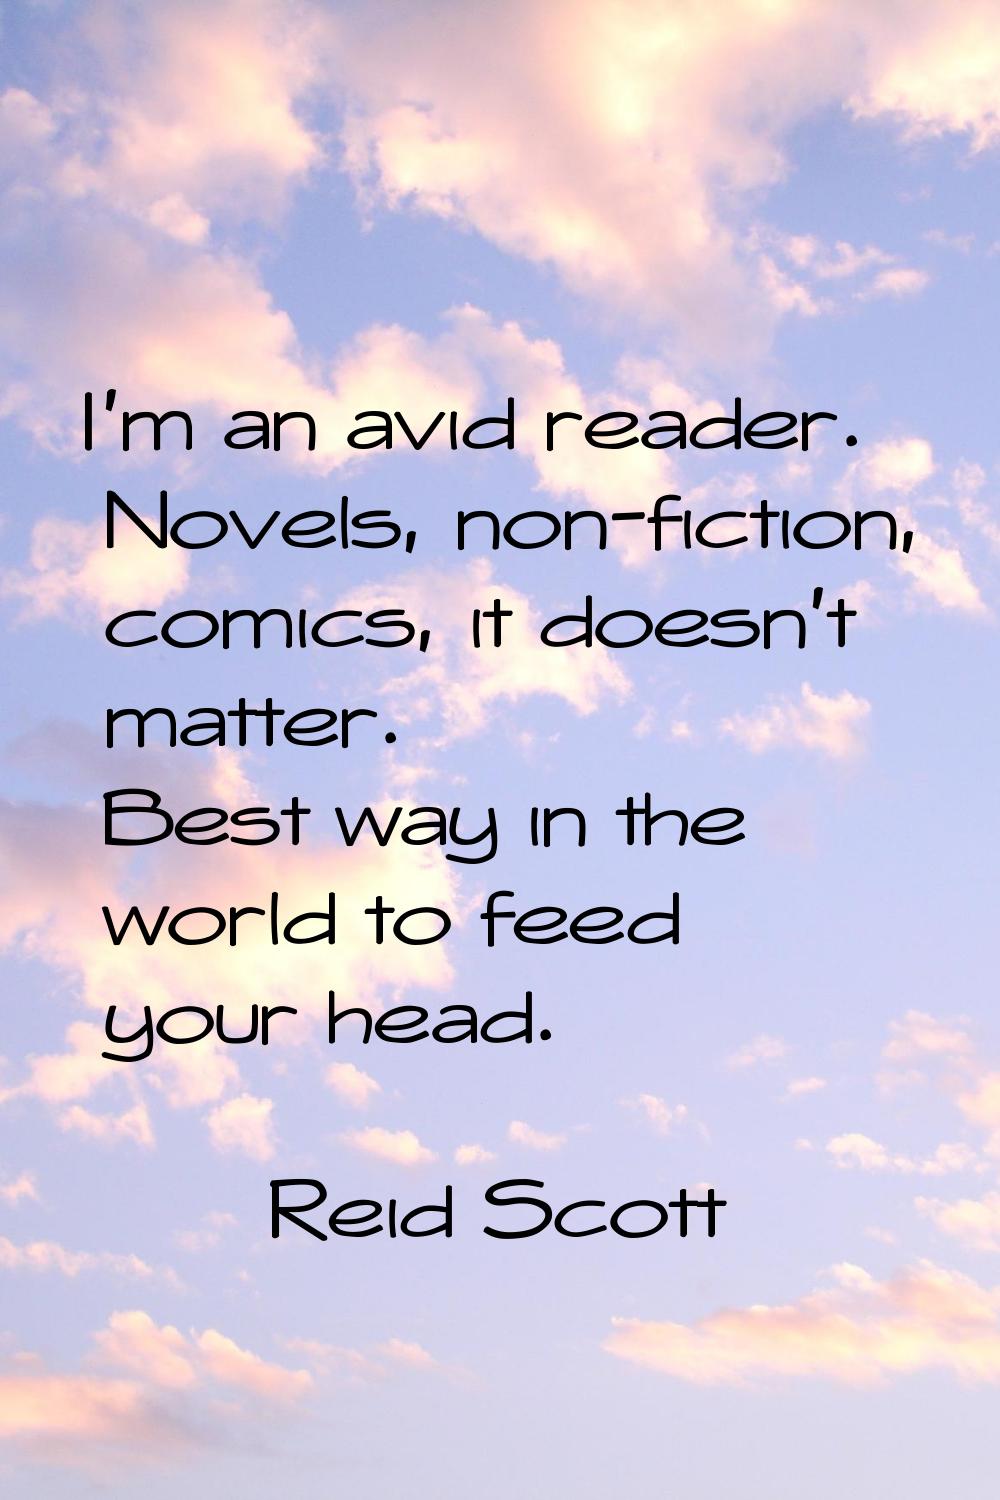 I'm an avid reader. Novels, non-fiction, comics, it doesn't matter. Best way in the world to feed y